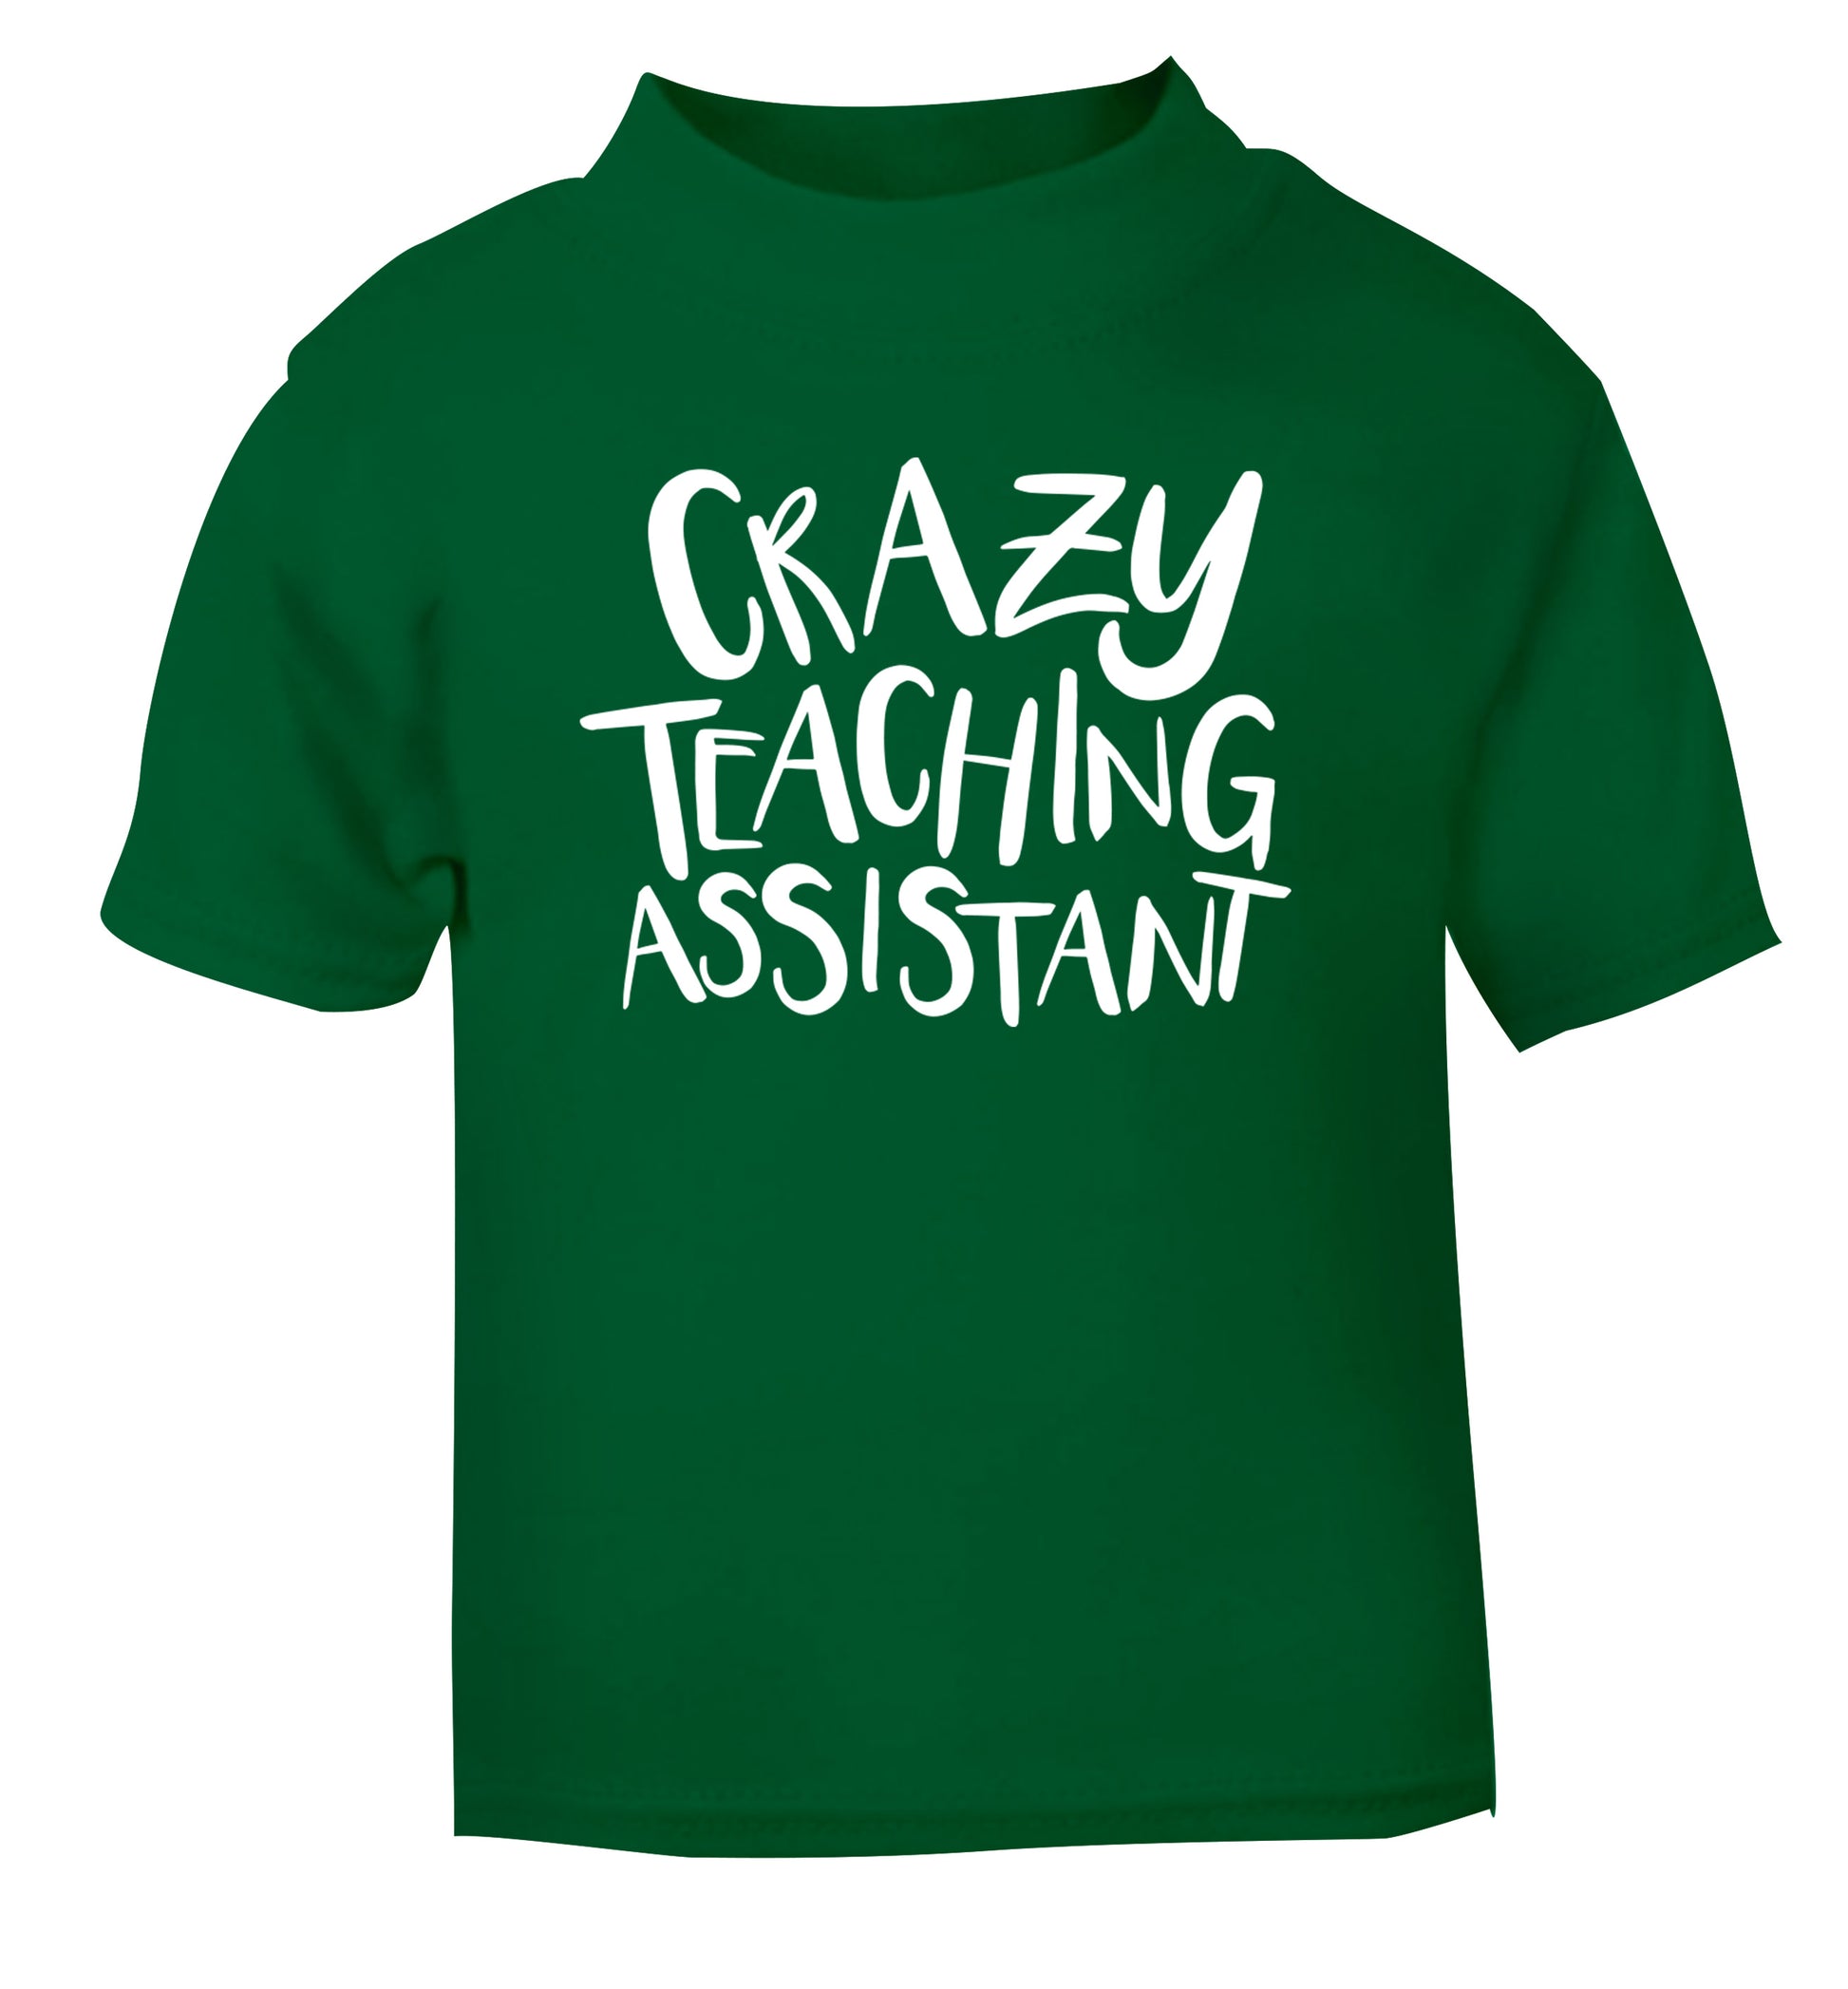 Crazy Teaching Assistant green Baby Toddler Tshirt 2 Years